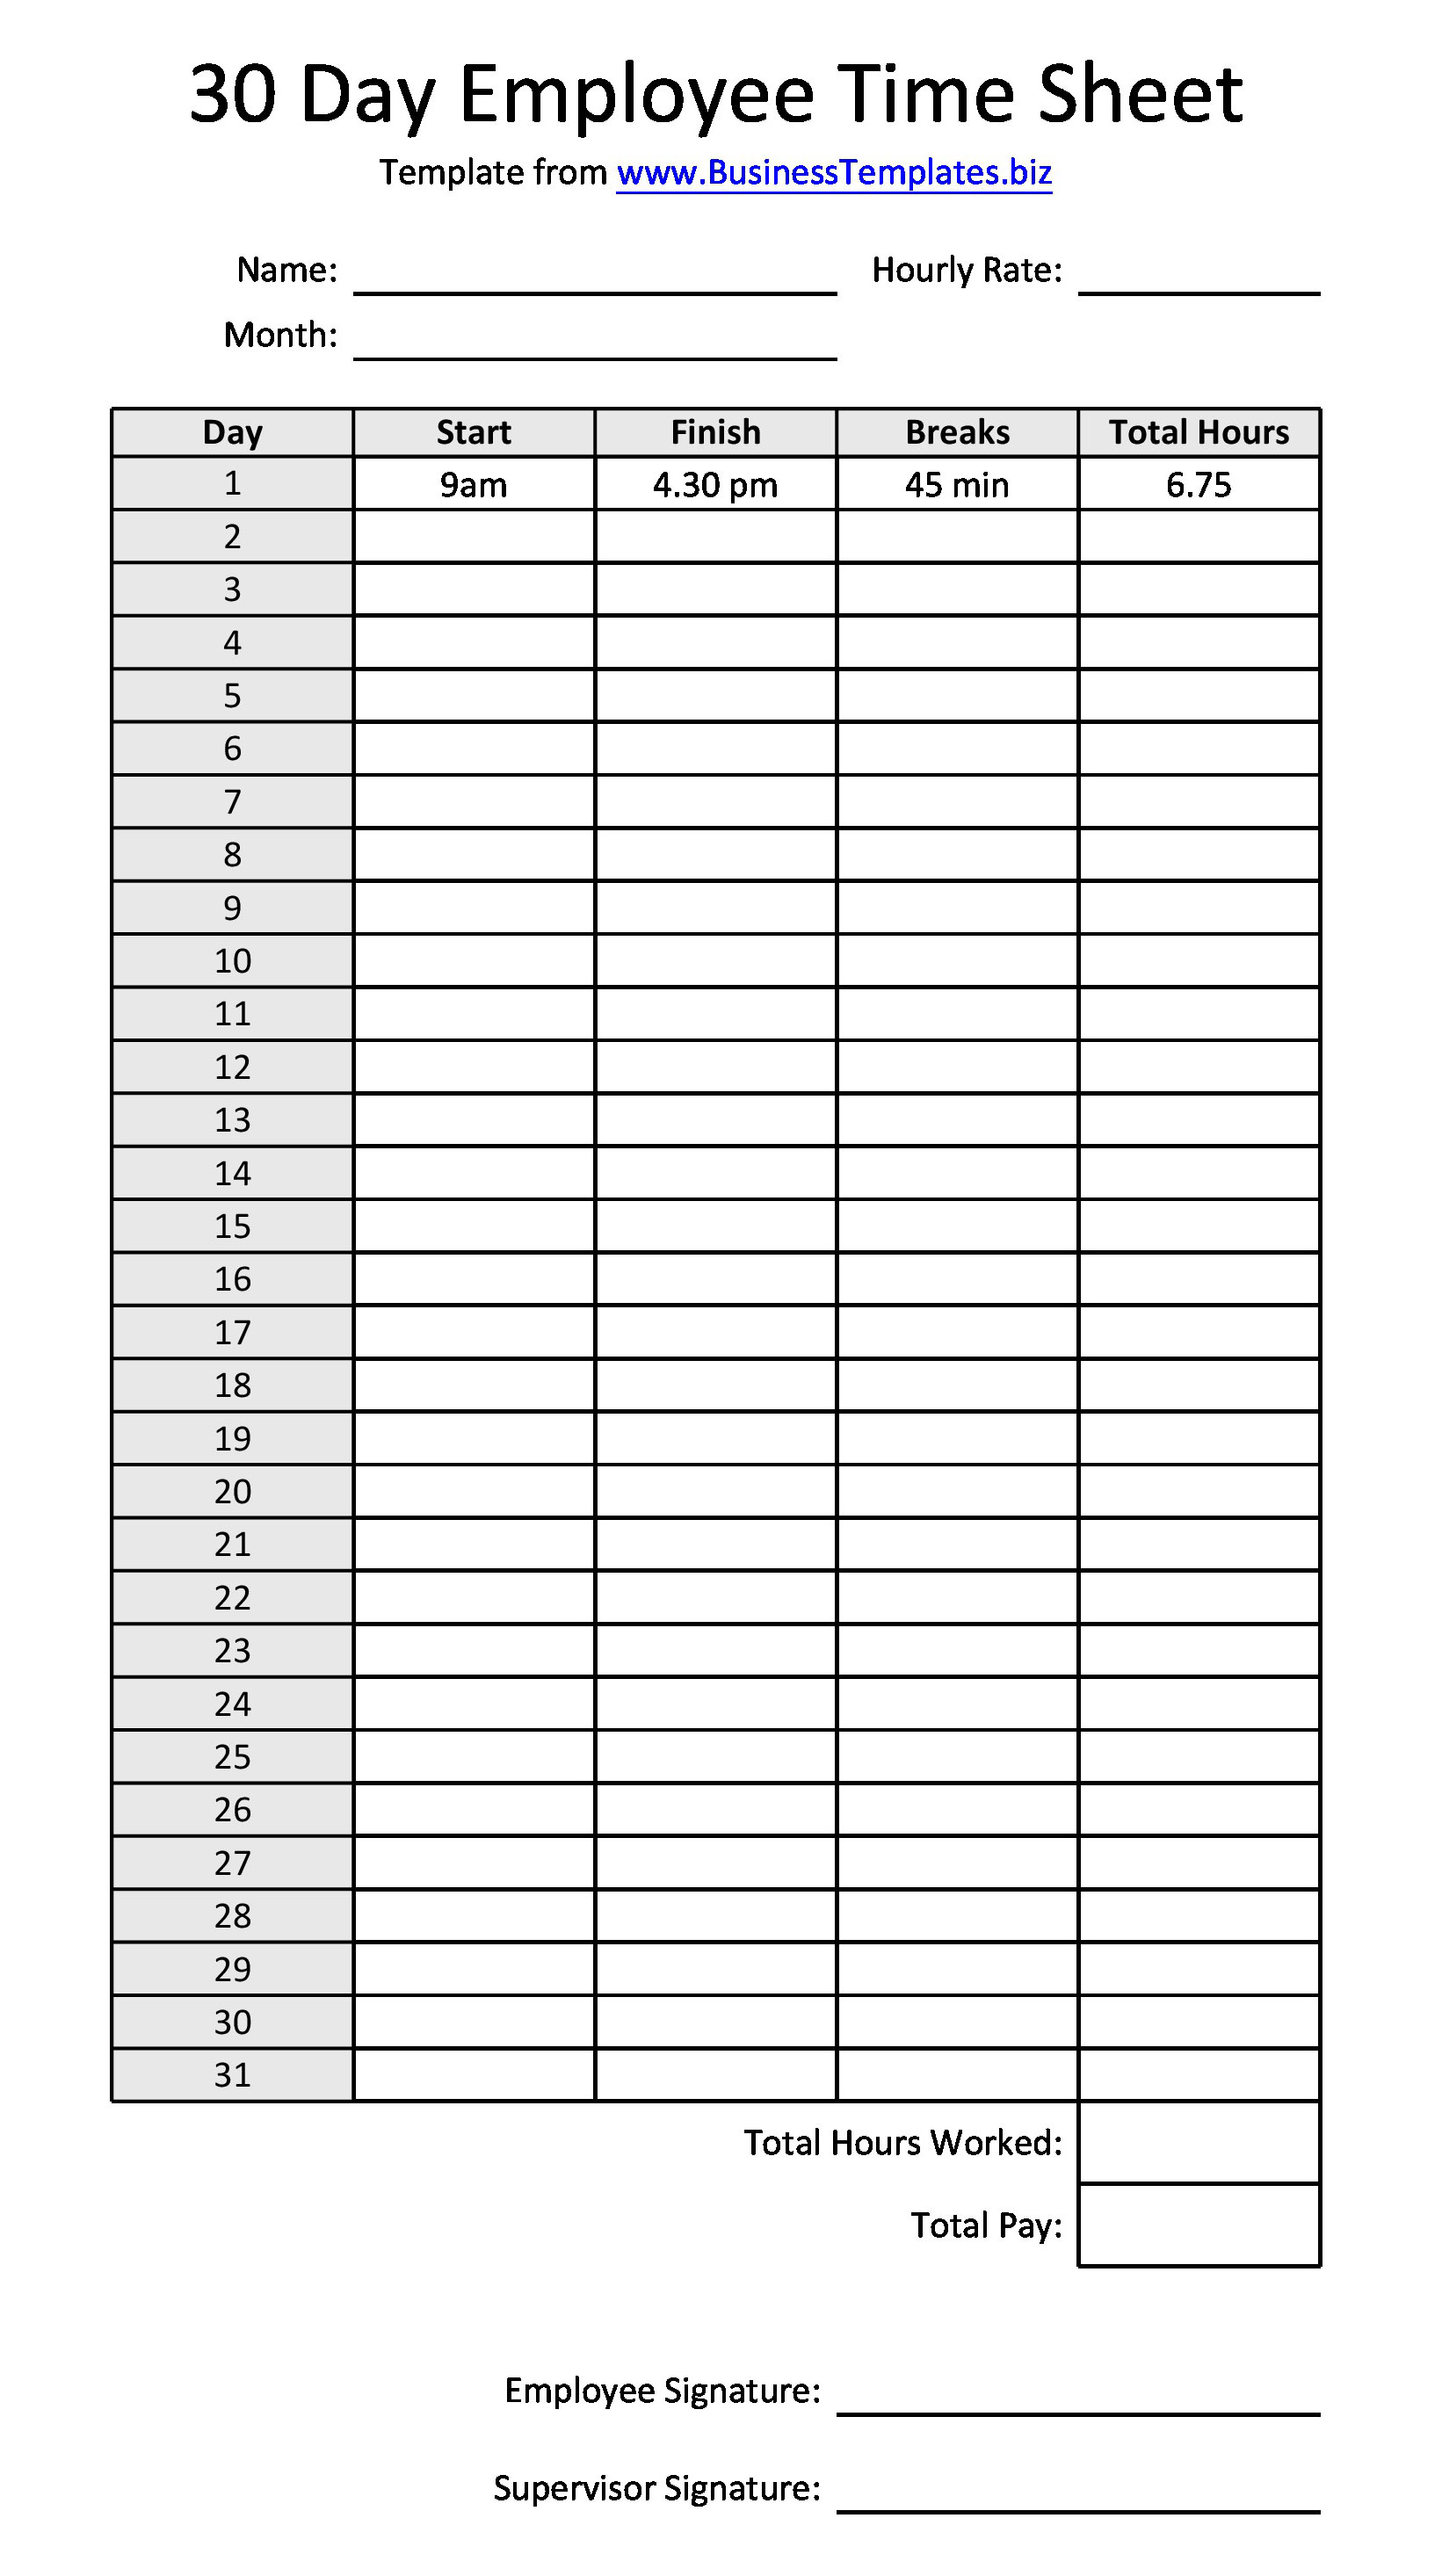 free-sample-30-day-employee-time-sheet-template